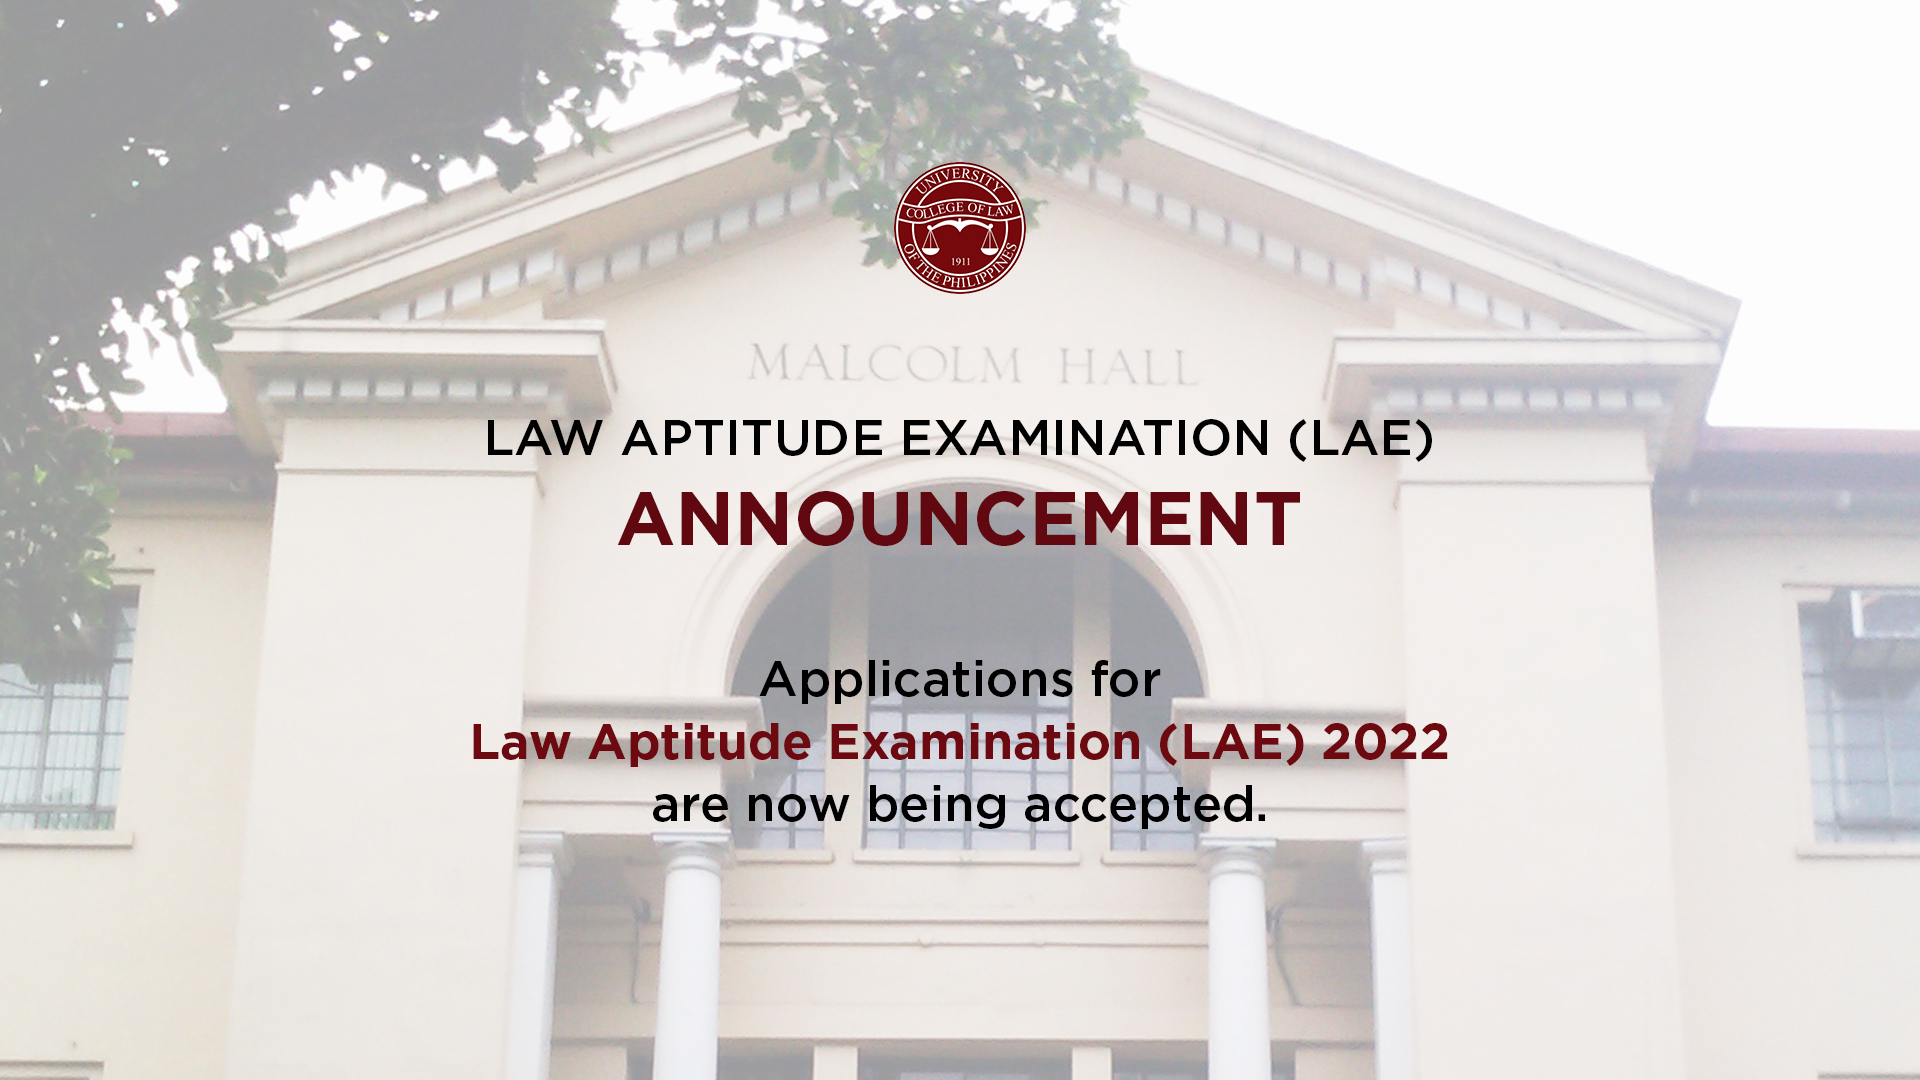 Applications for LAE 2022 Are Now Being Accepted